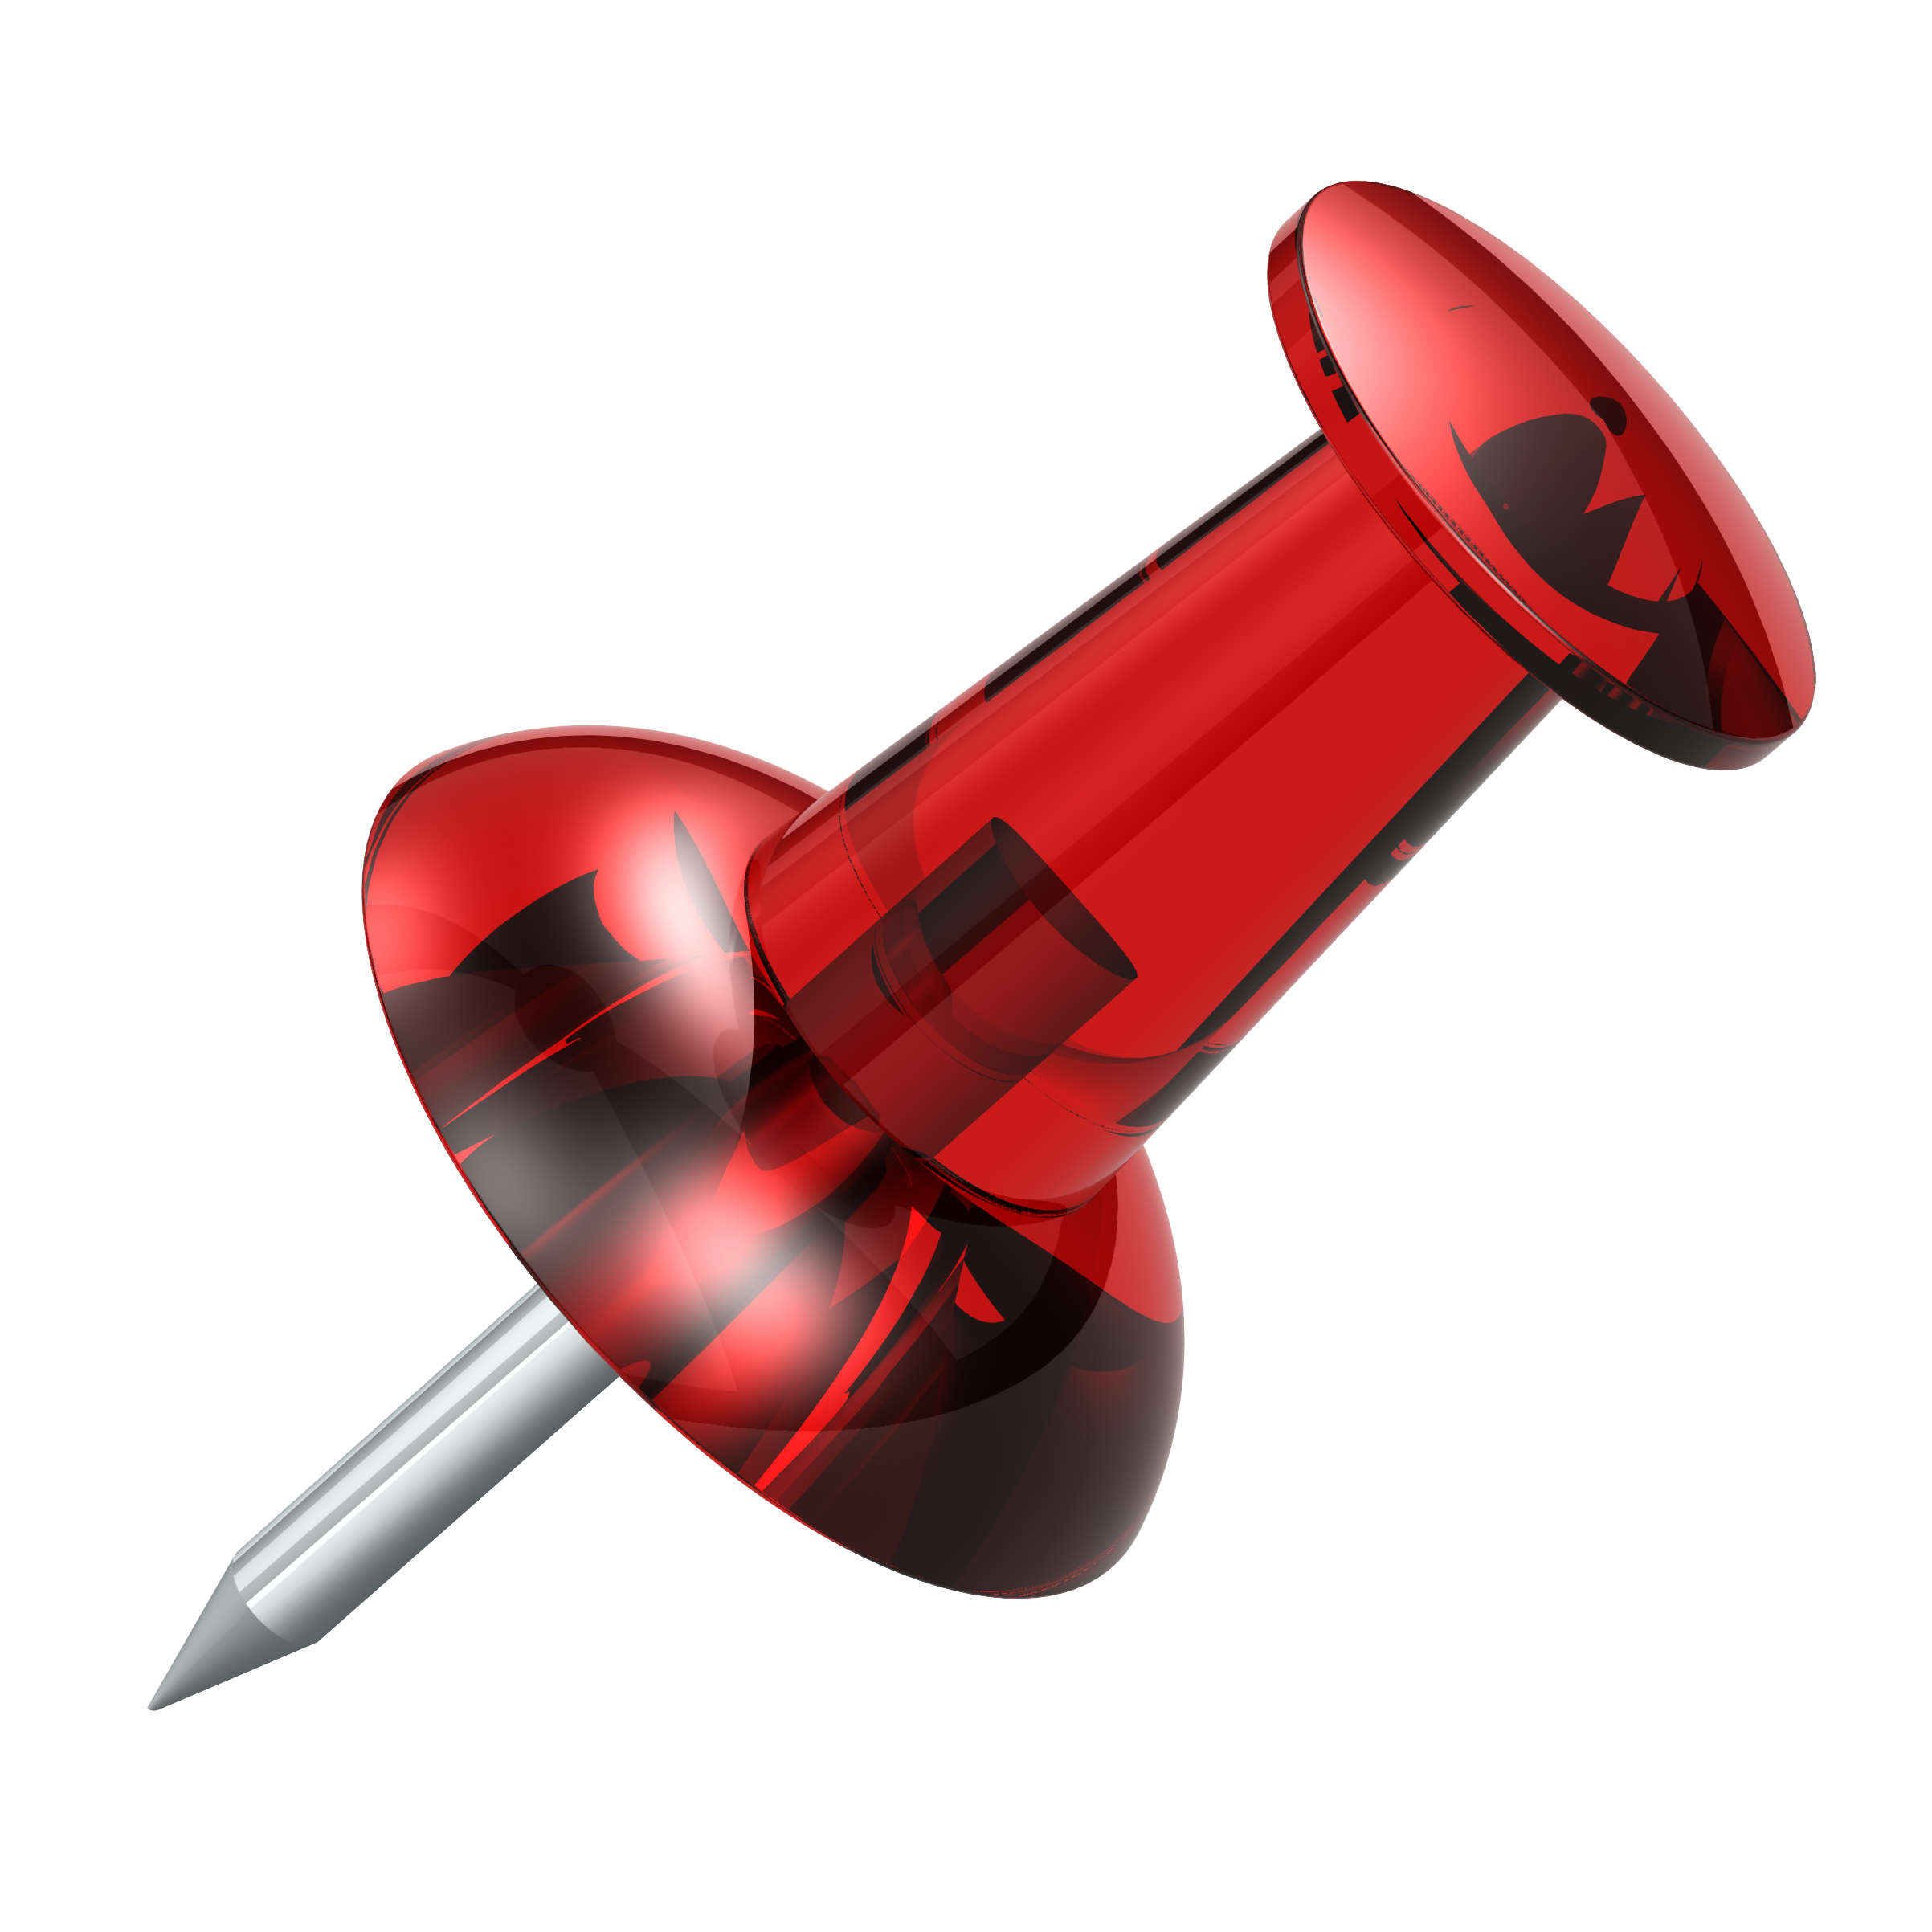 Surplies Push Pin Red No Back   Free Images At Clker Com   Vector Clip